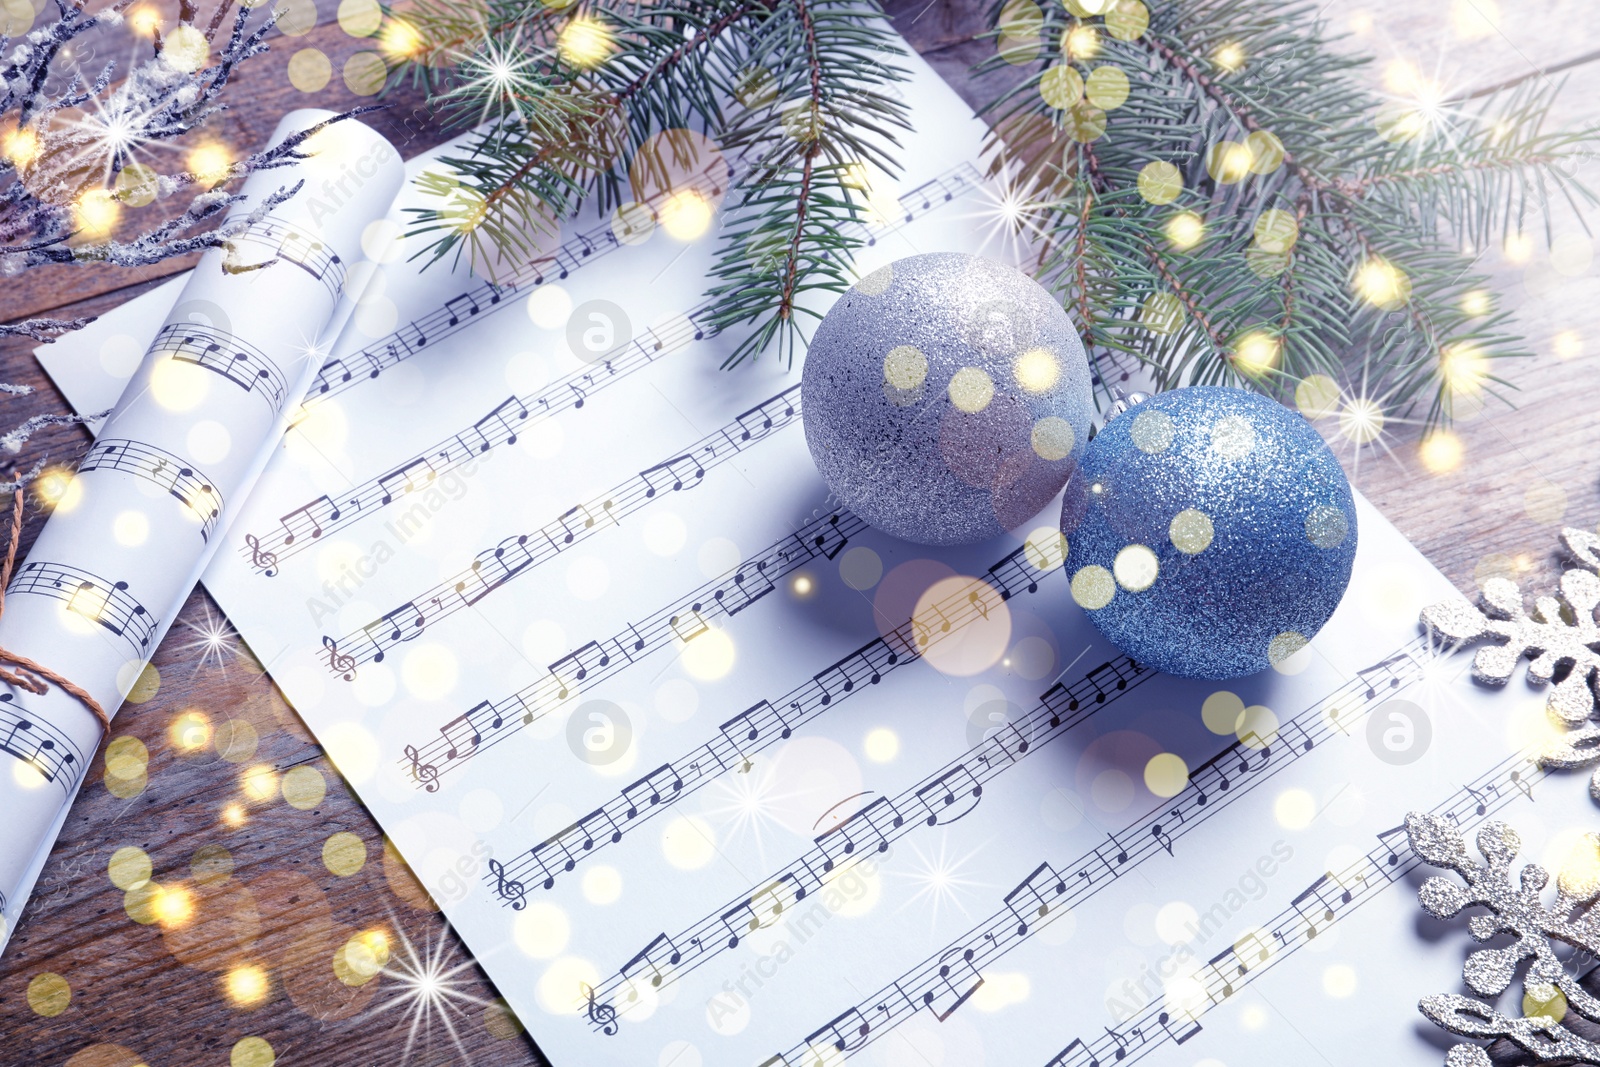 Image of Composition with Christmas decorations and music sheets on wooden background. Bokeh effect